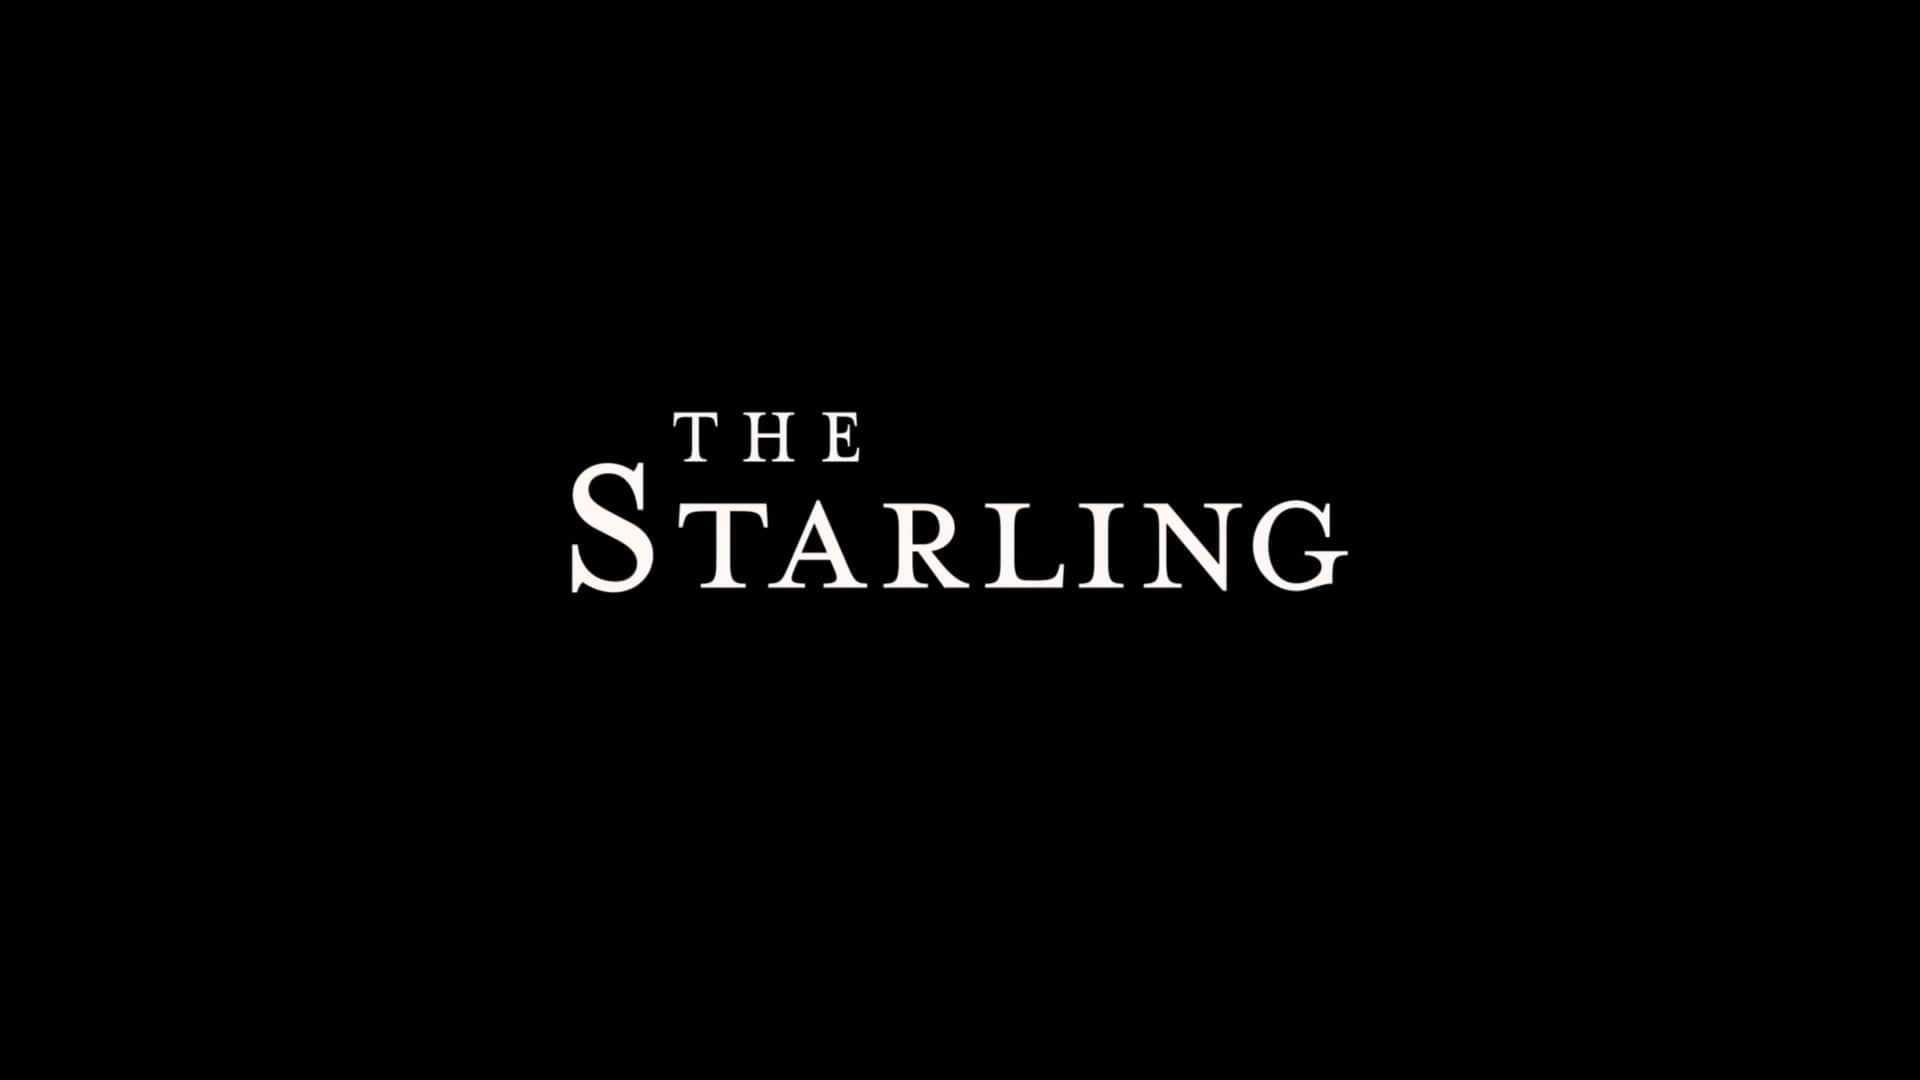 Netflix The Starling Trailer, Coming to Netflix in September 2021